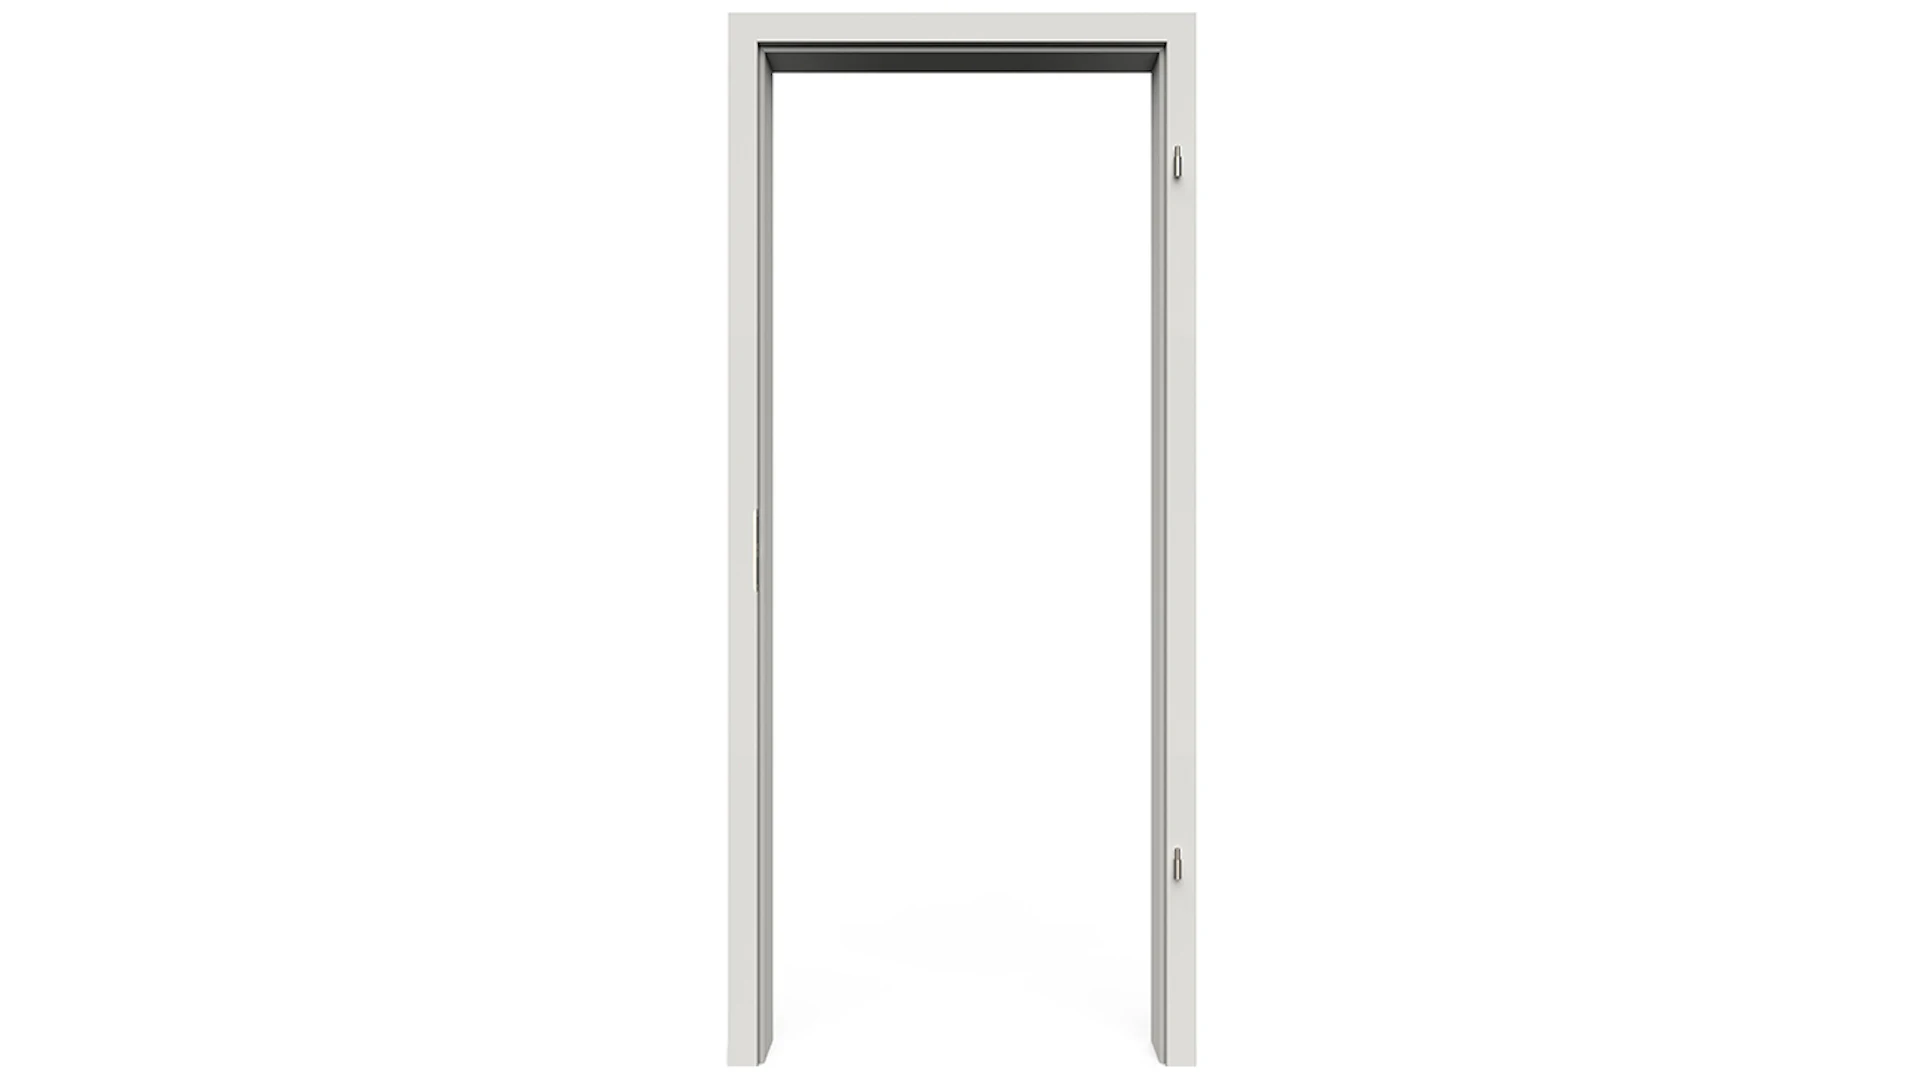 planeo Standard Doorframe Rounded edge - CPL Pearl white - 2110 x 860 x 310 mm DIN Left